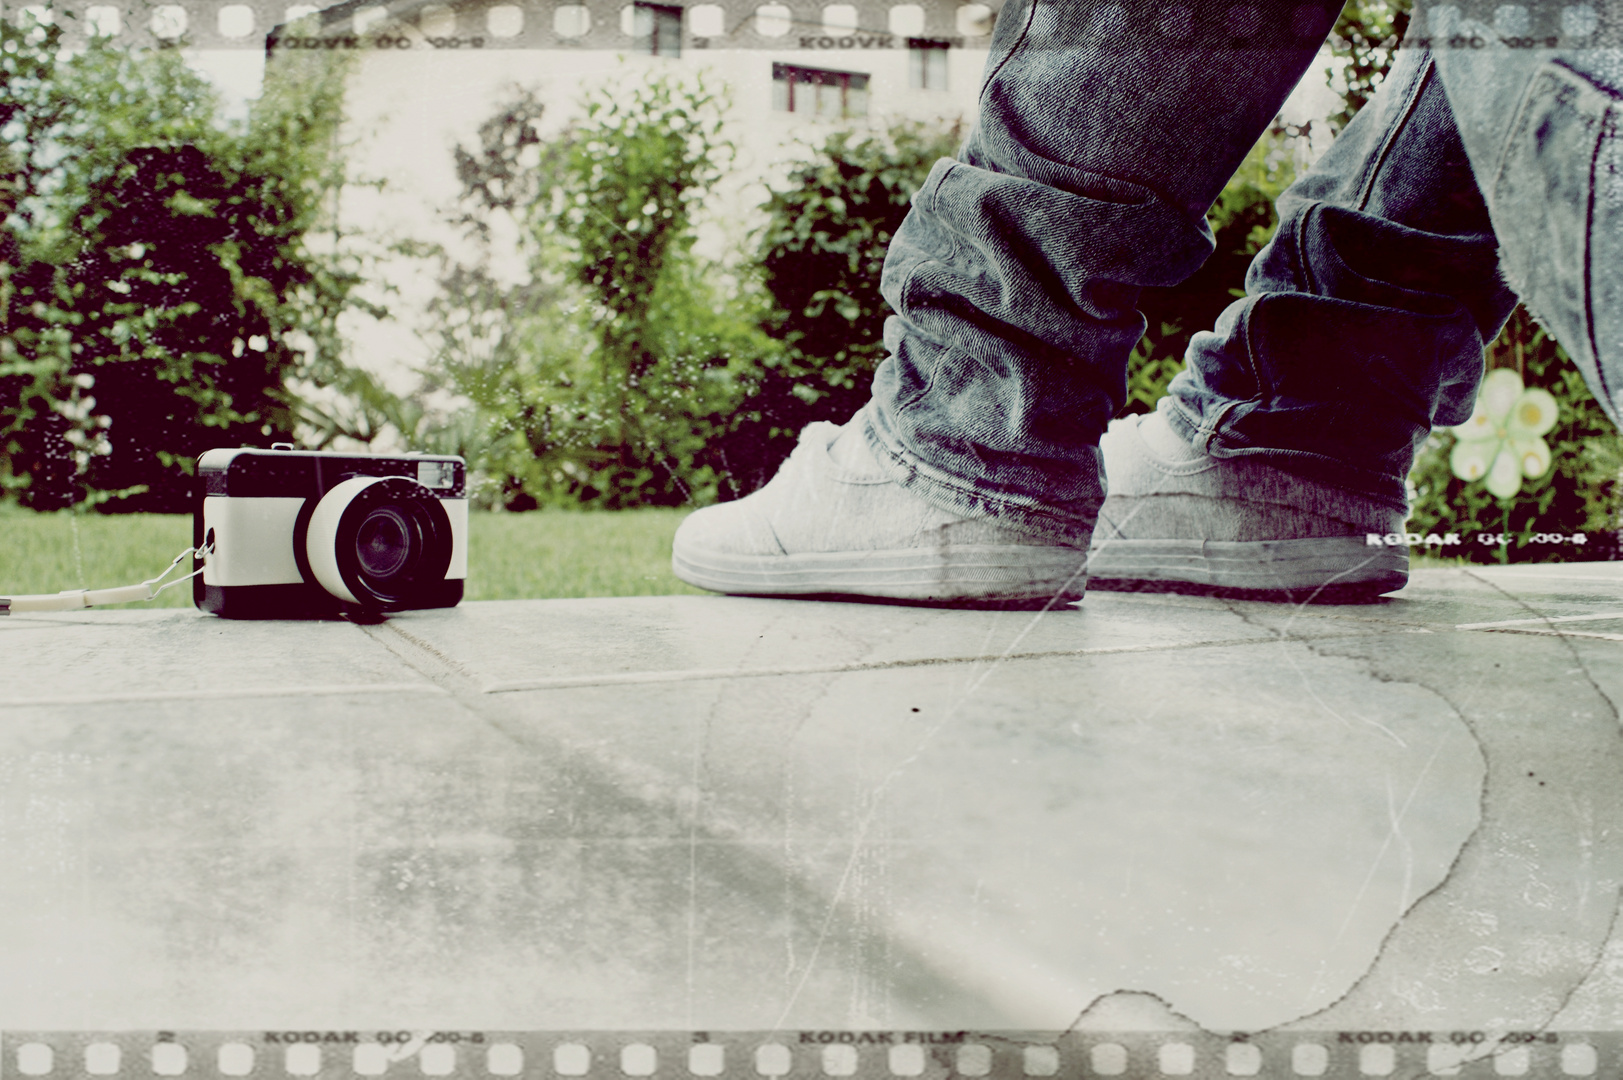 Lomographie and Shoes